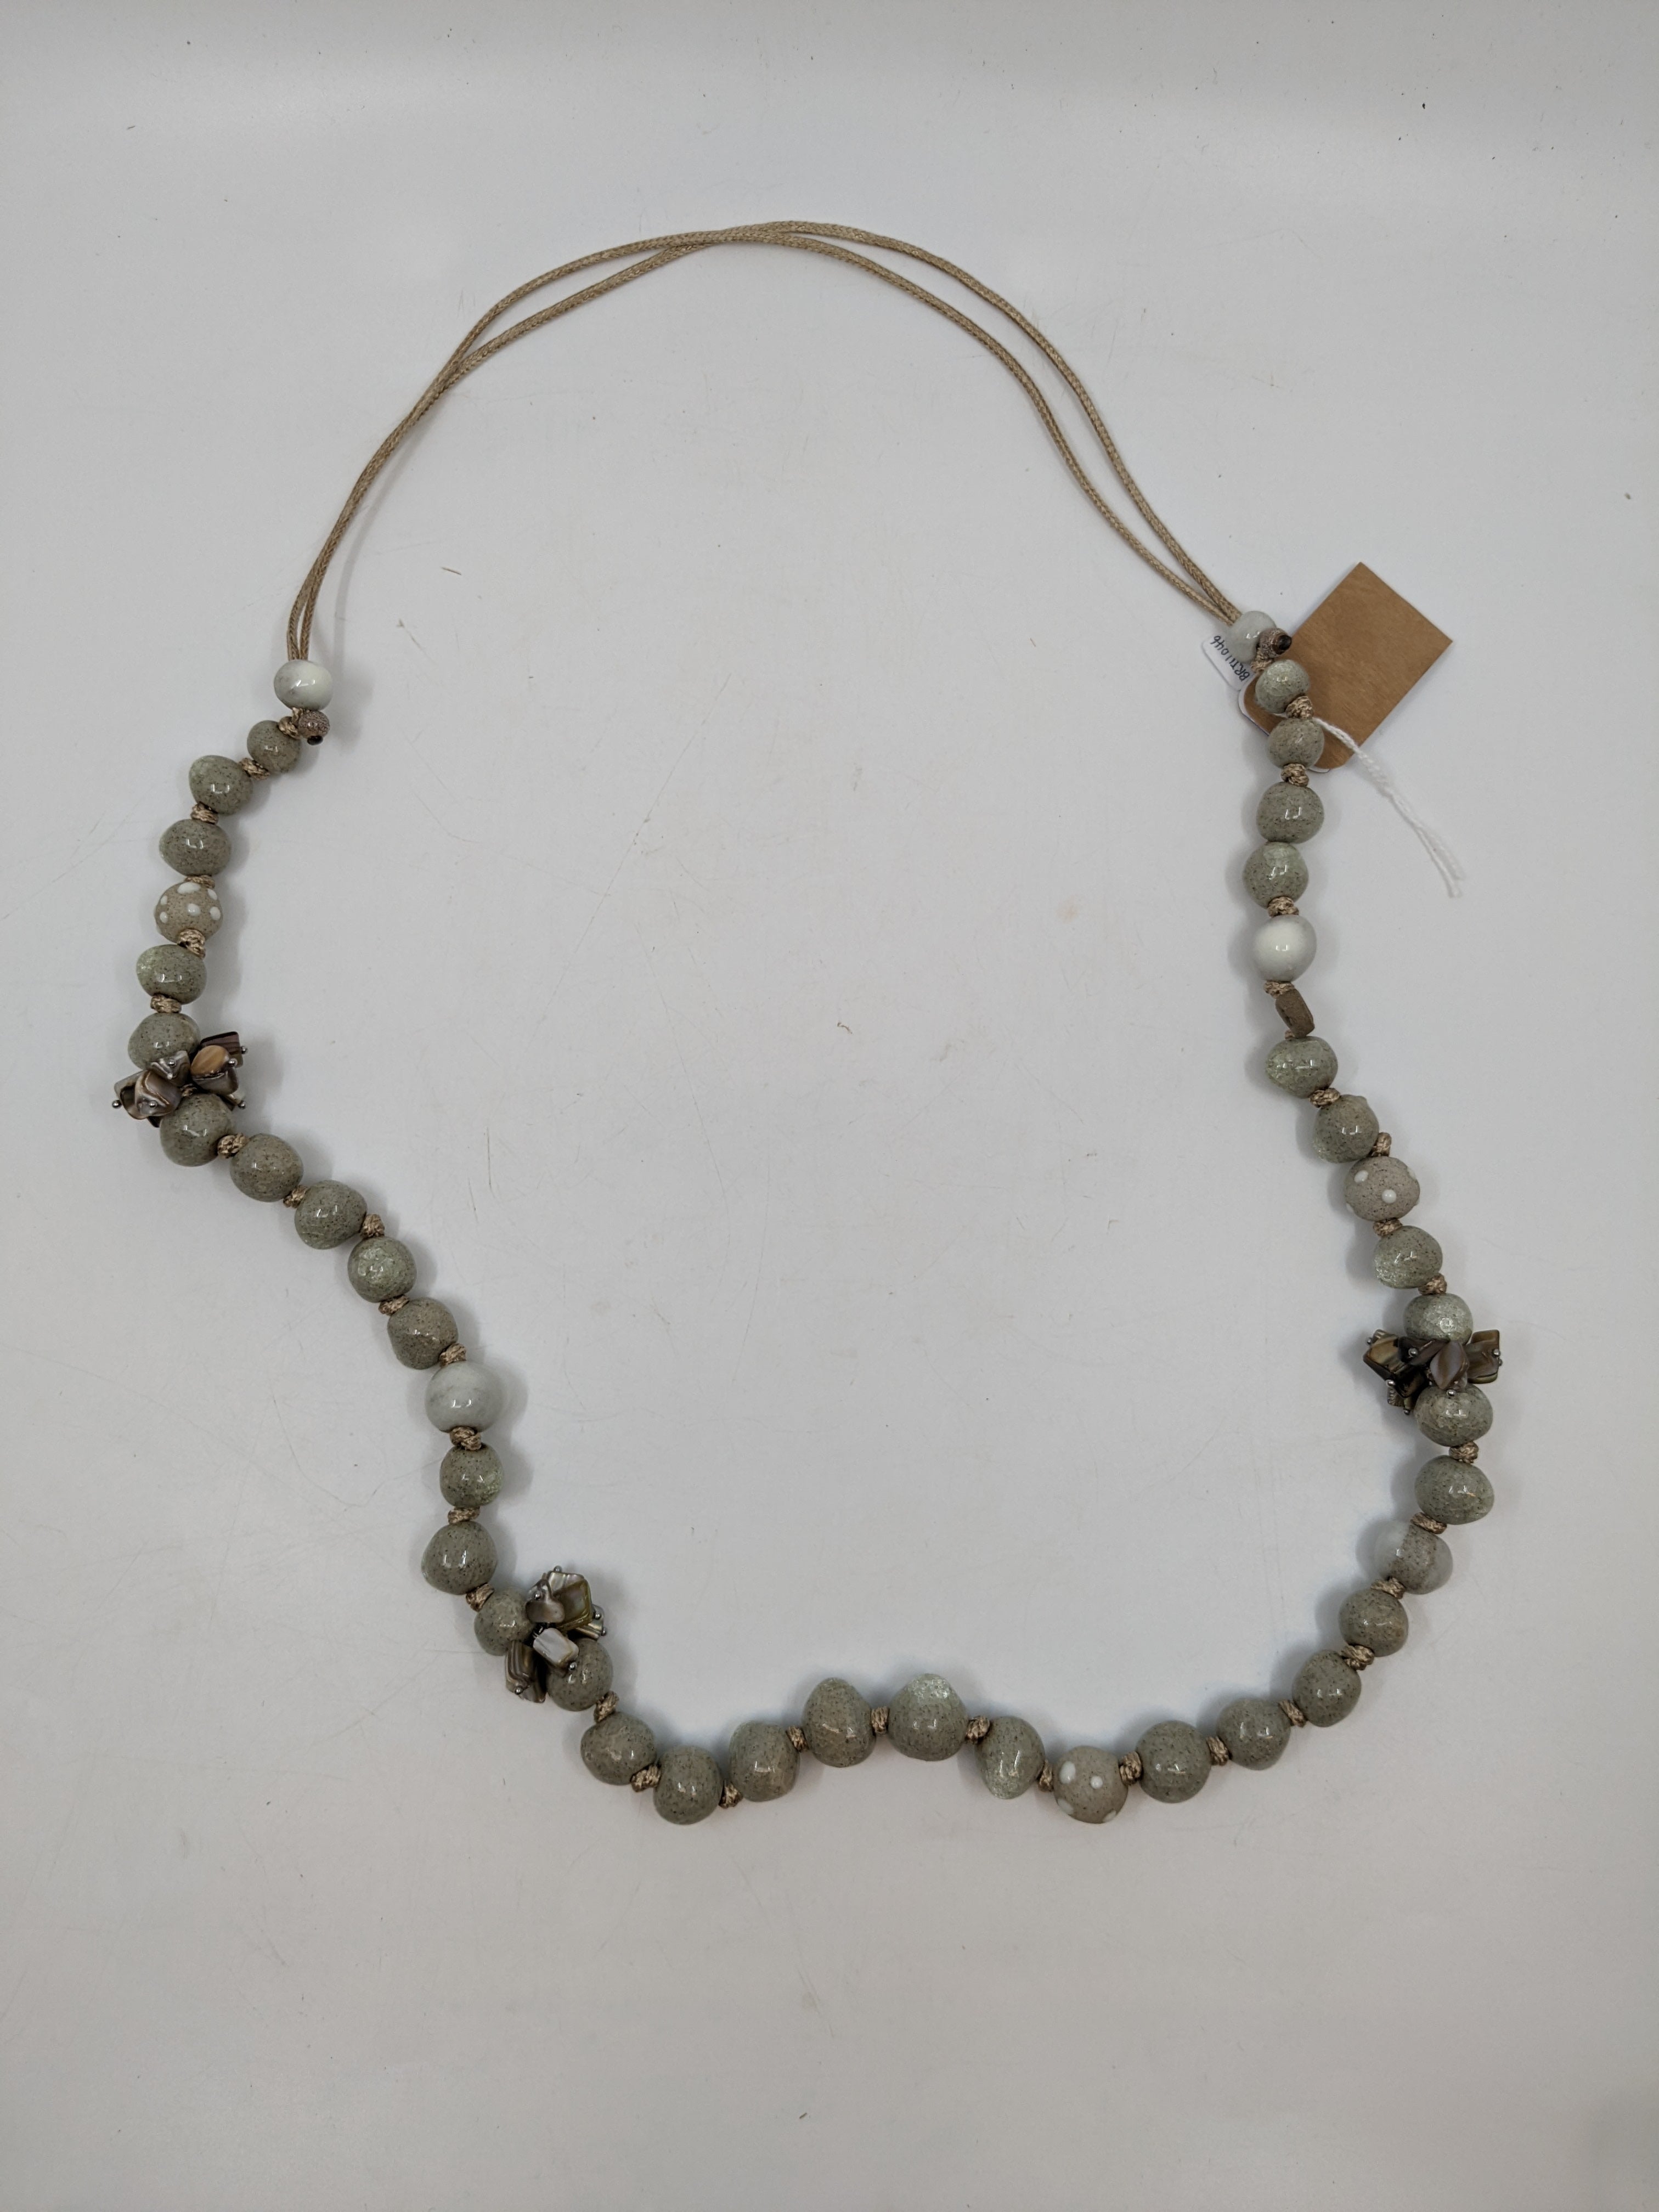 Long Bead Necklace with Shells